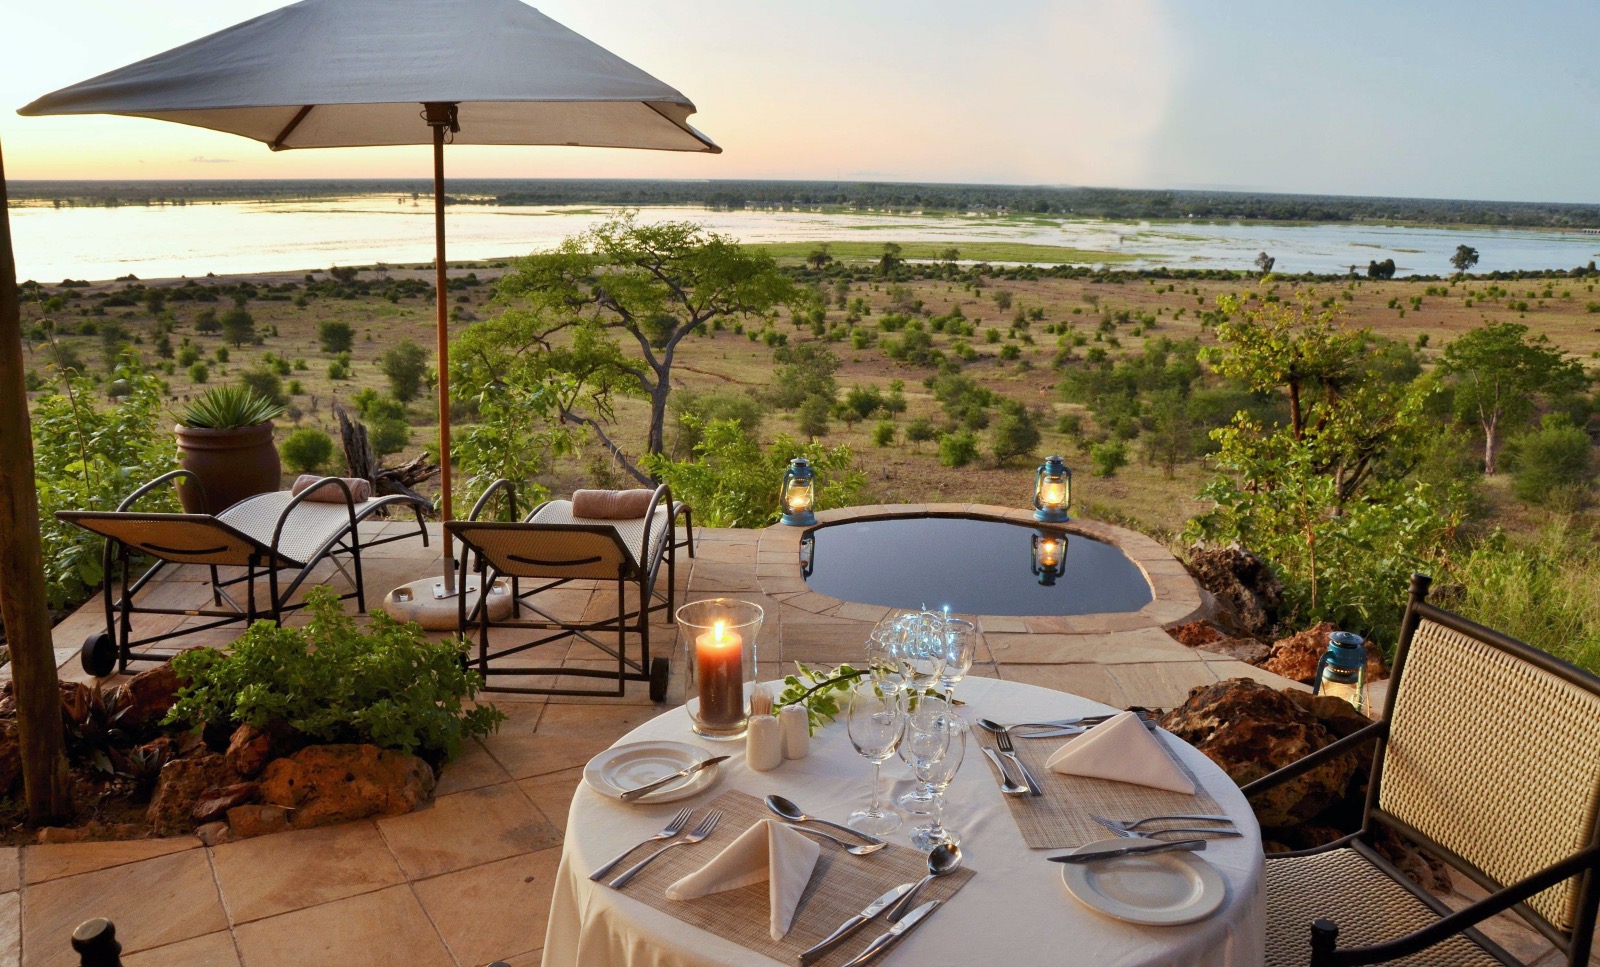 Romantic dinner for two set up on a private deck overlooking the landscape in Botswana.